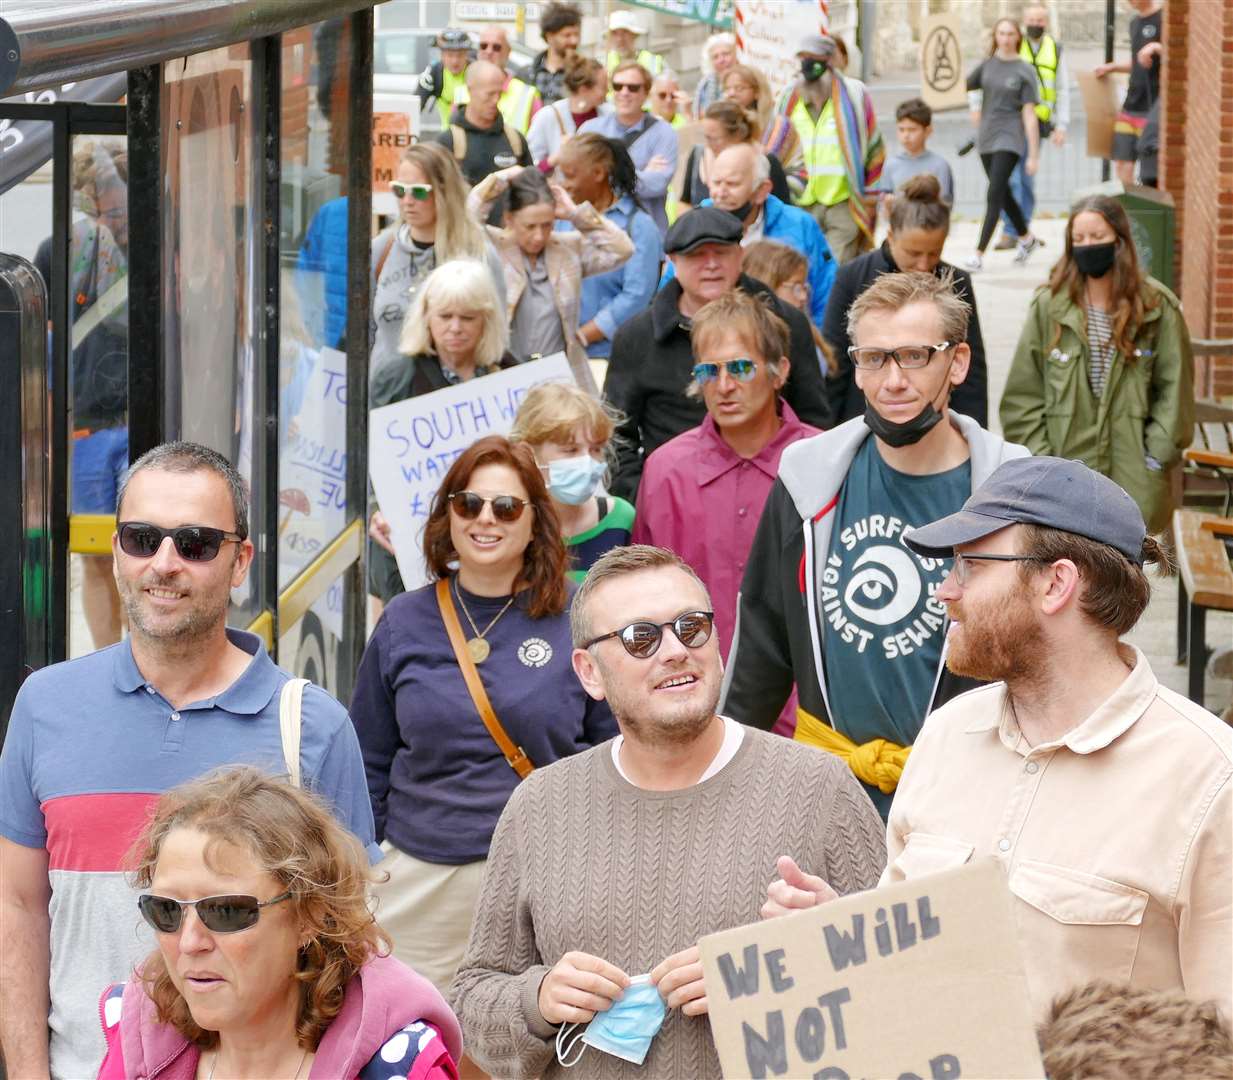 The protest against Southern Water sewage leaks in Thanet. Picture: Frank Leppard photography